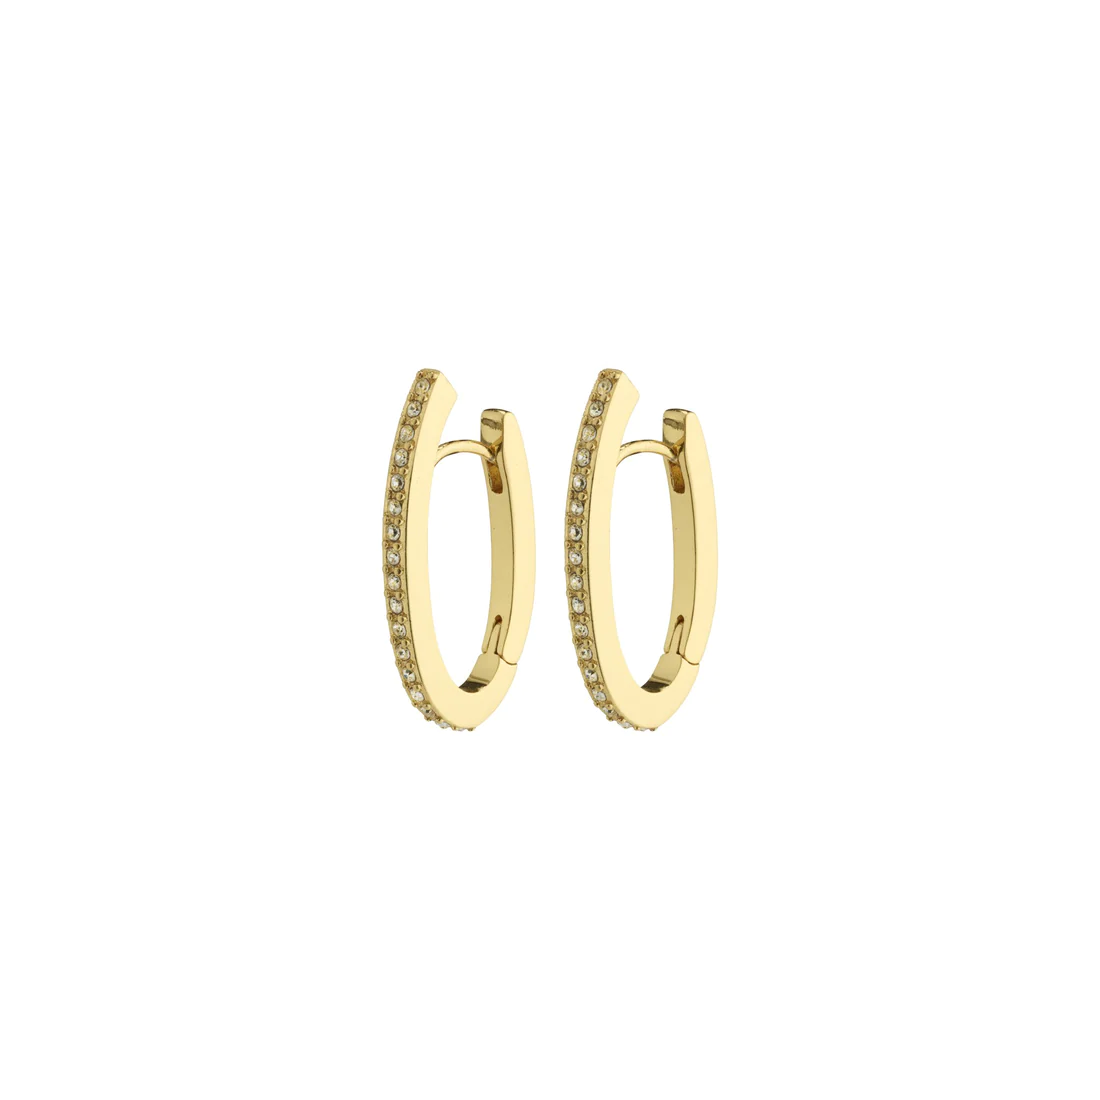 Pilgrim Anaya Hoops - Gold Accessories - Jewelry - Earrings by Pilgrim | Grace the Boutique